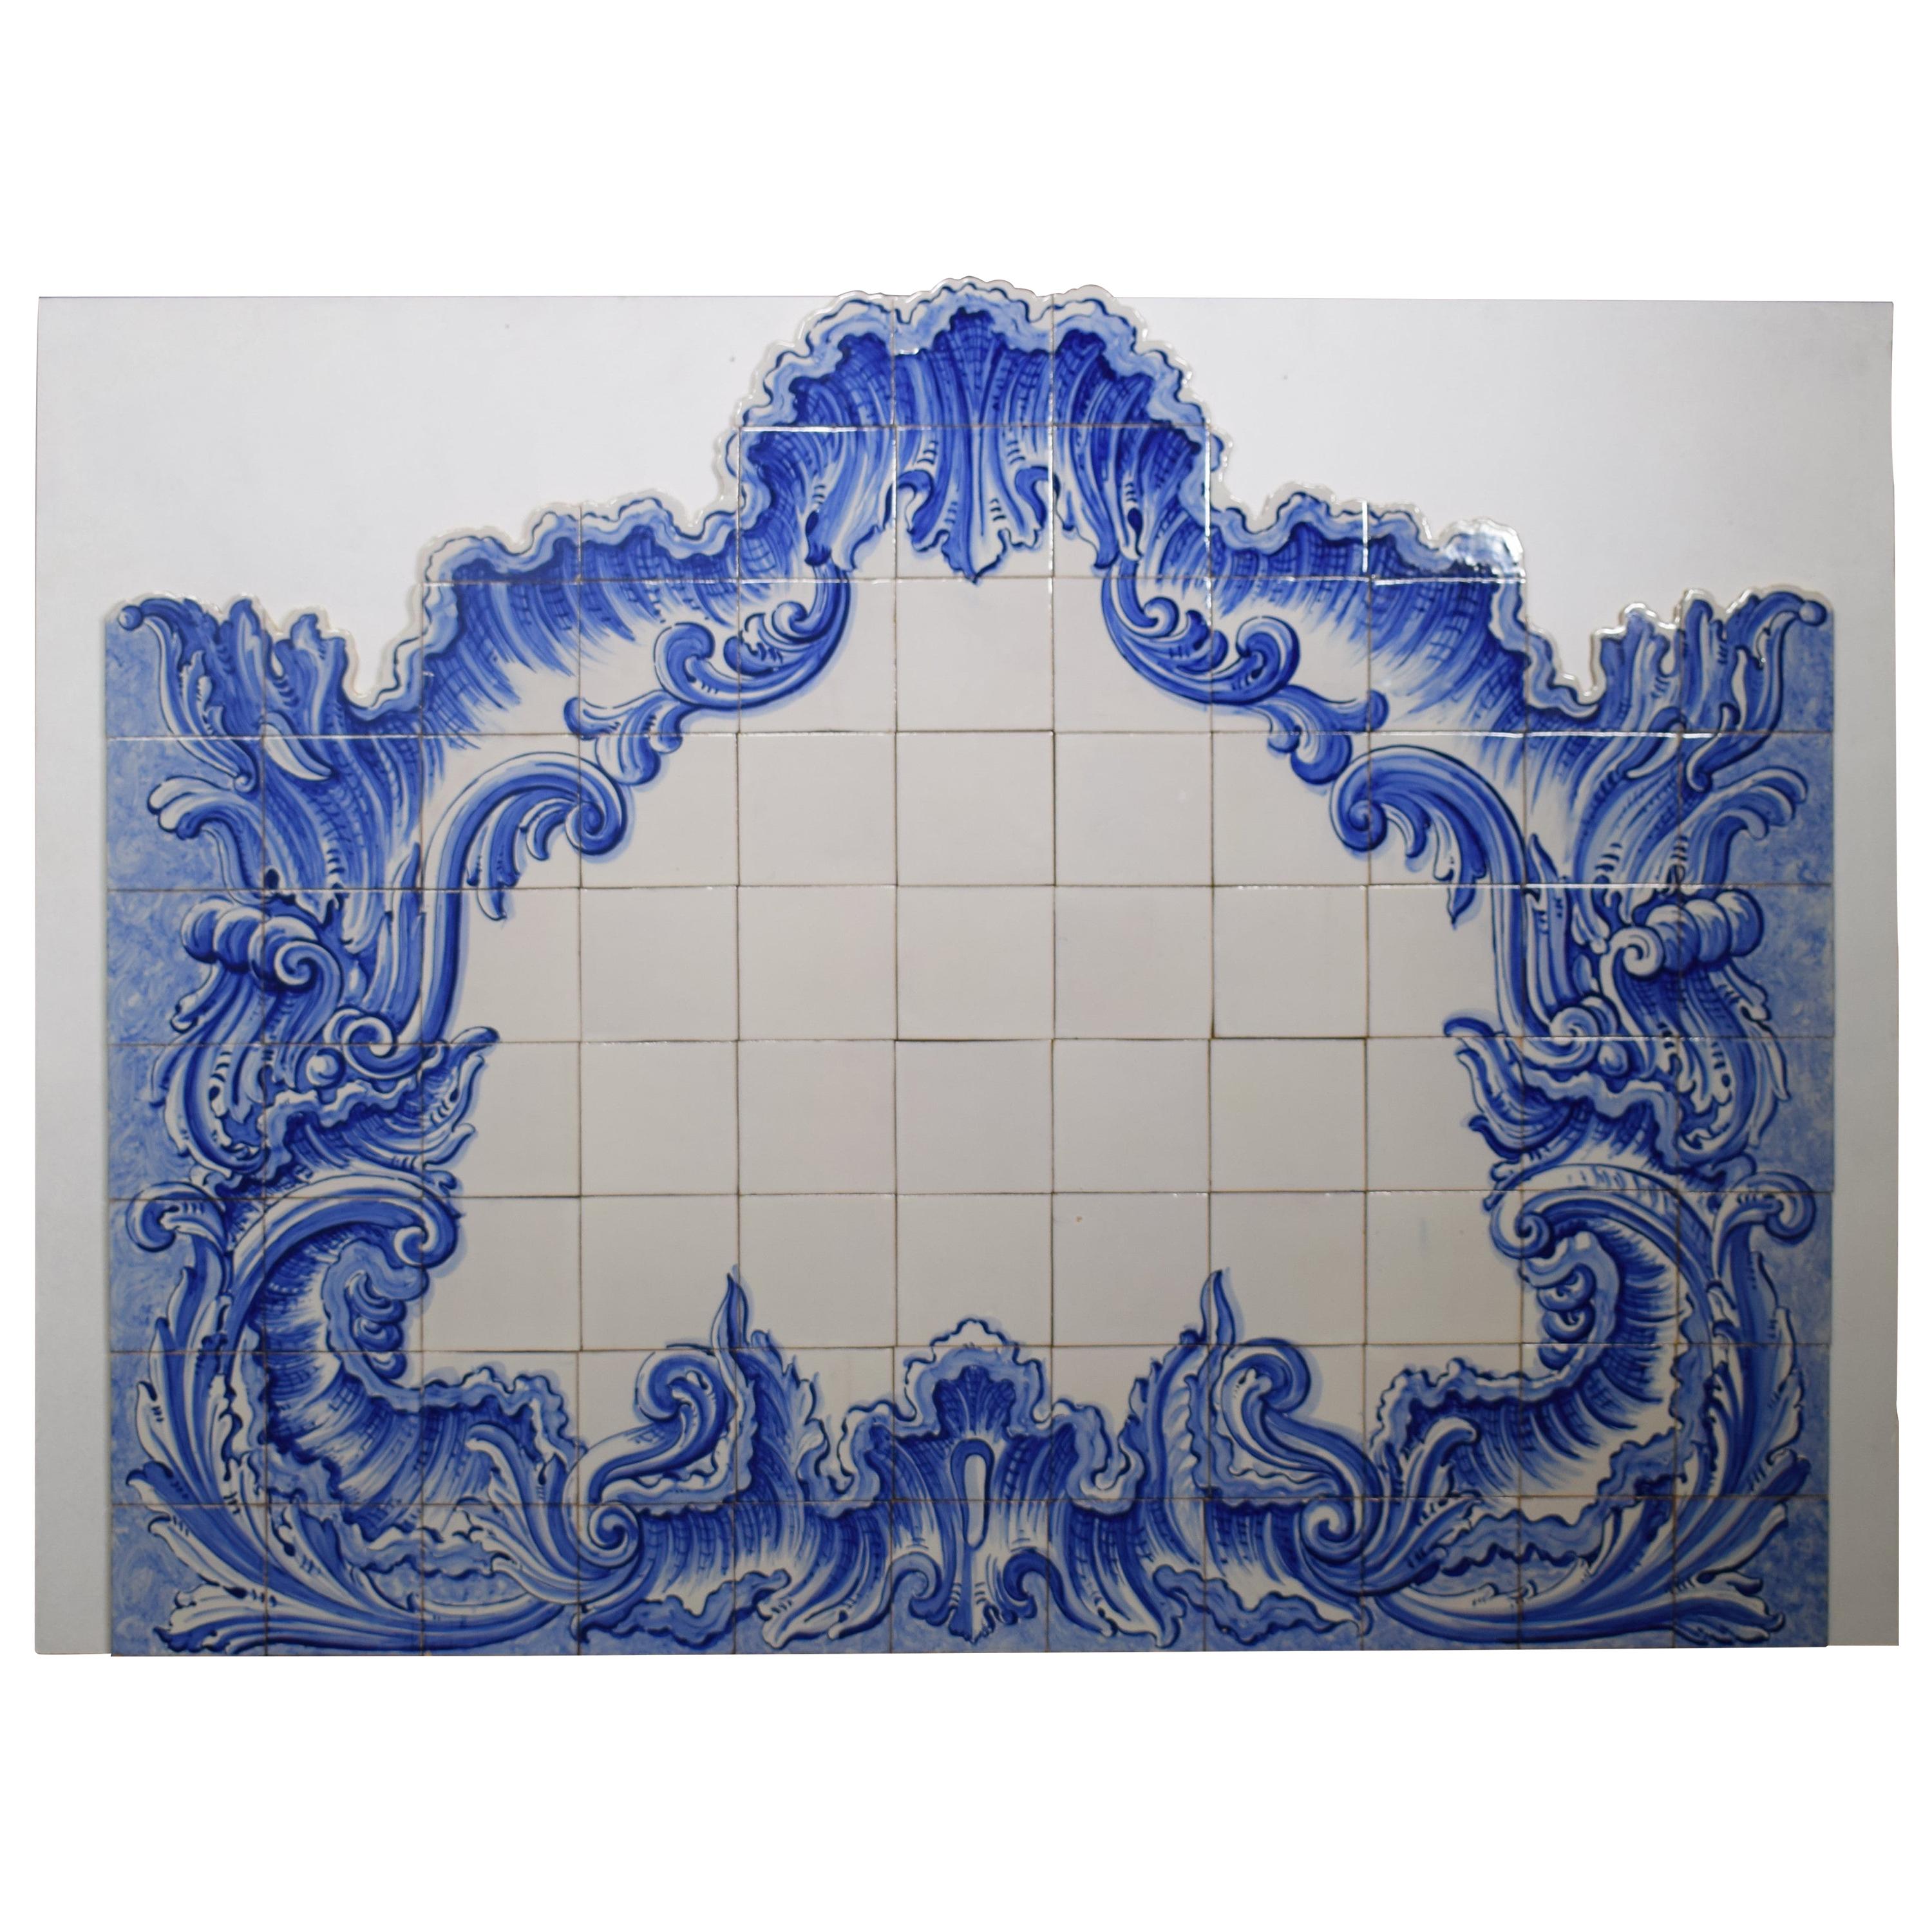 Blue & White Tile Wall Ornament, Exquisite Detail